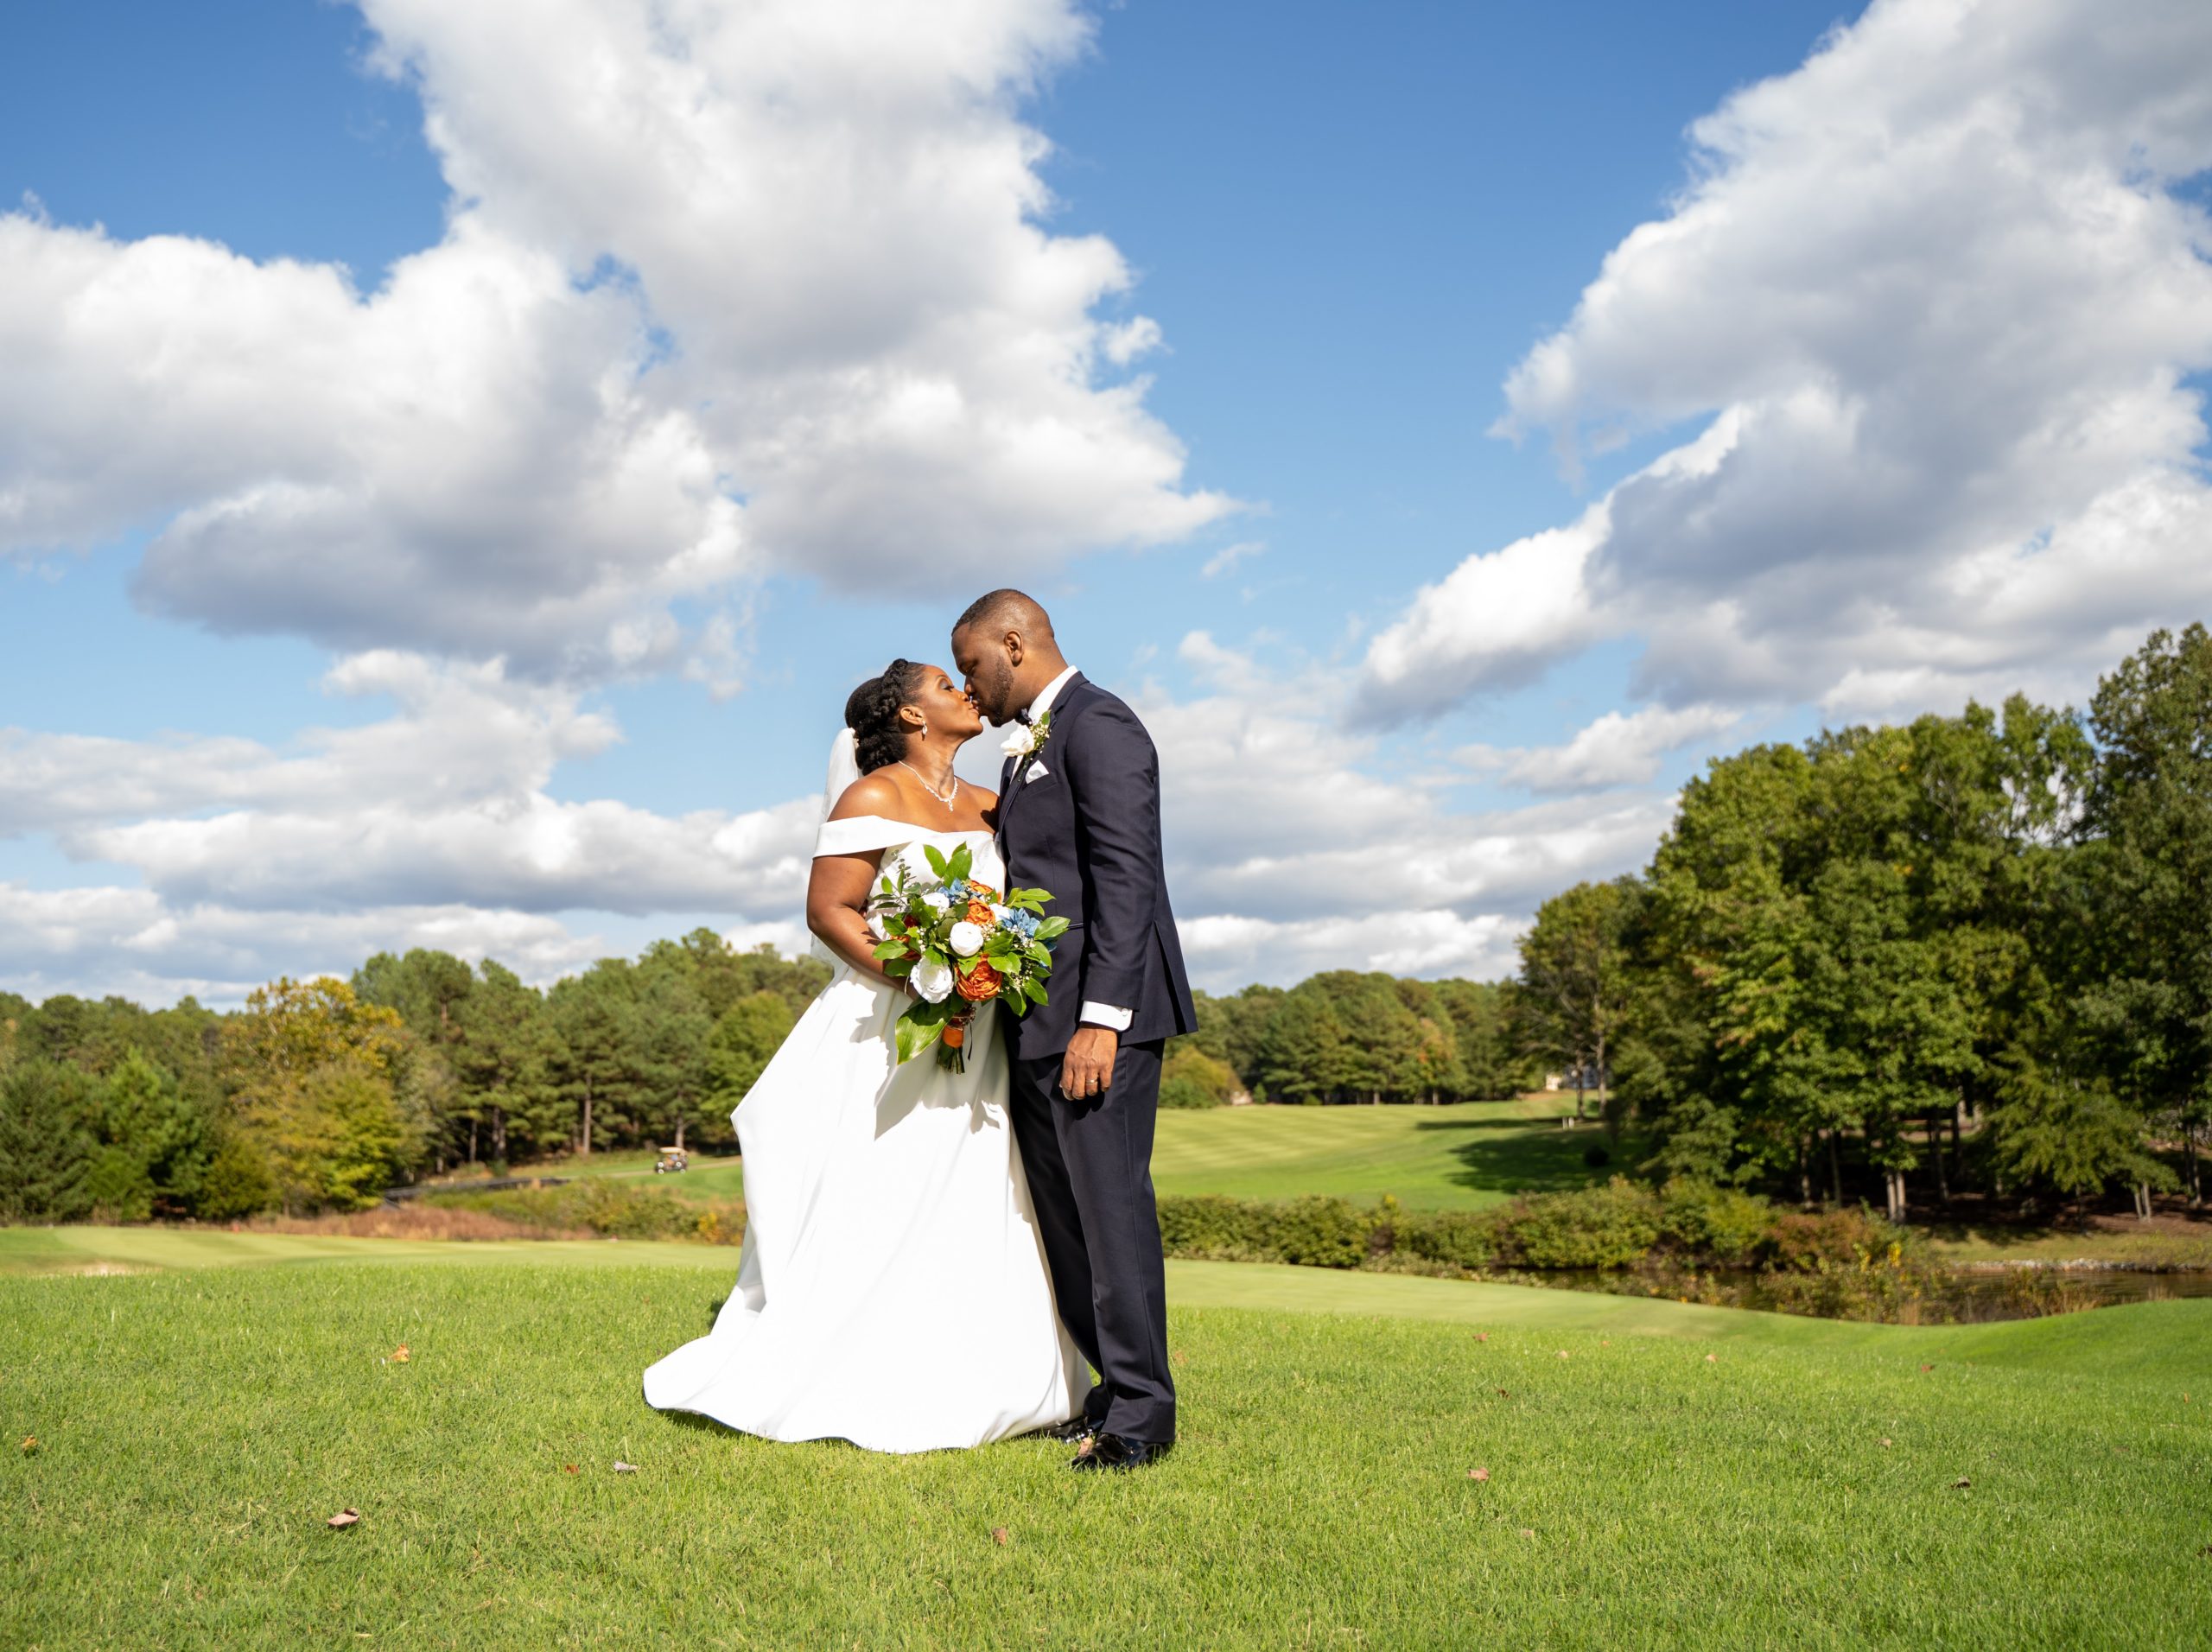 A bride and groom kiss on a golf course